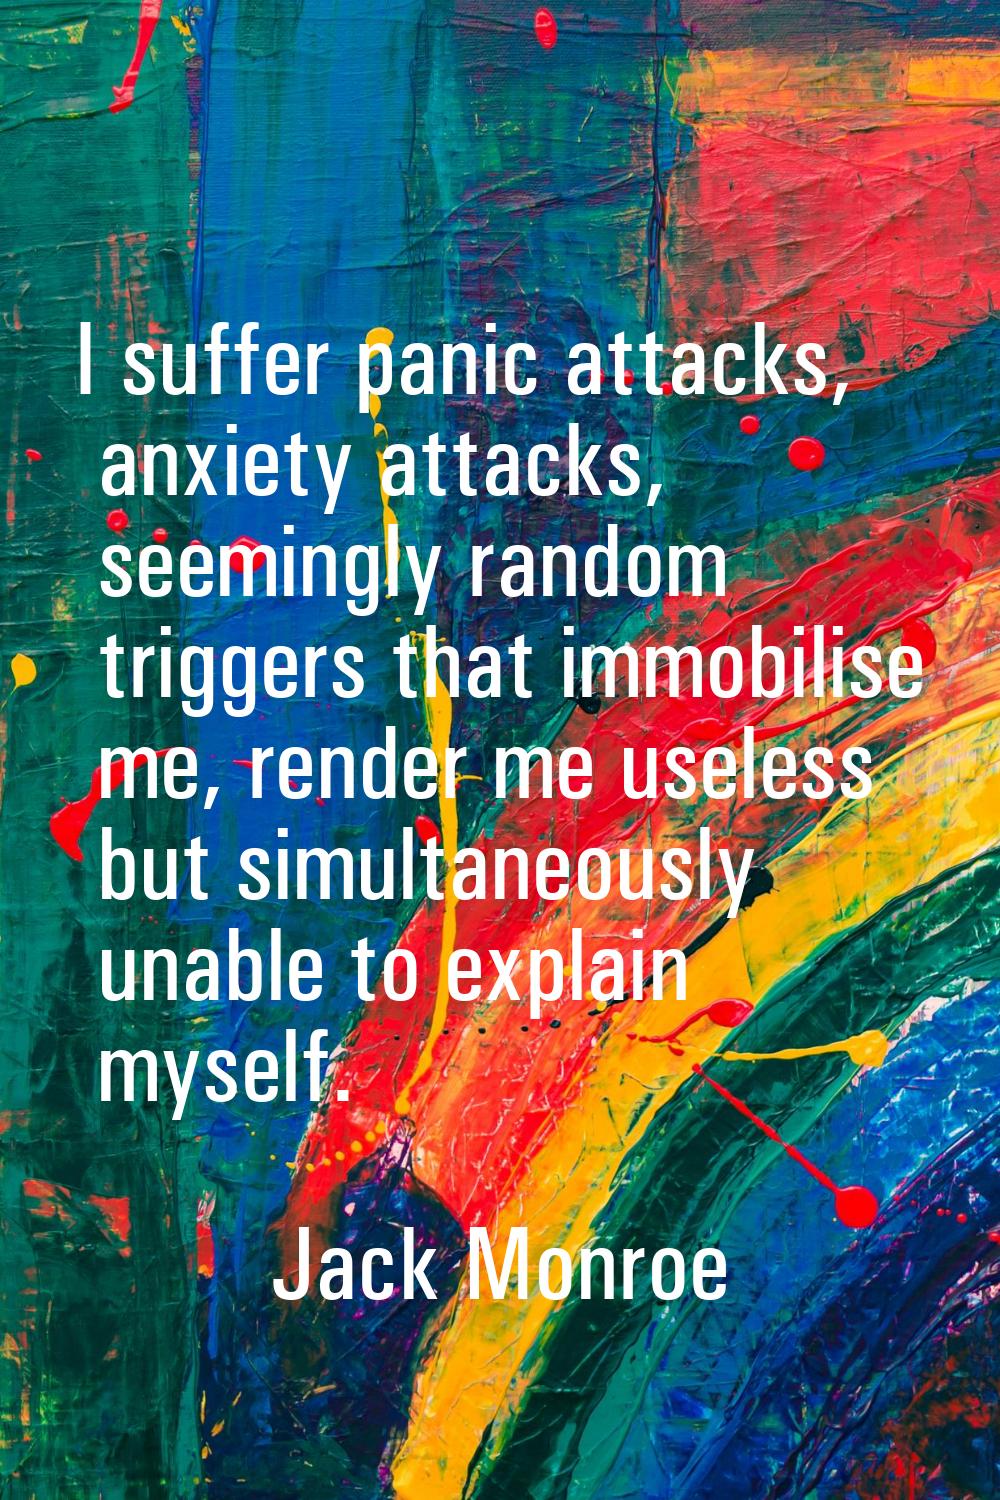 I suffer panic attacks, anxiety attacks, seemingly random triggers that immobilise me, render me us